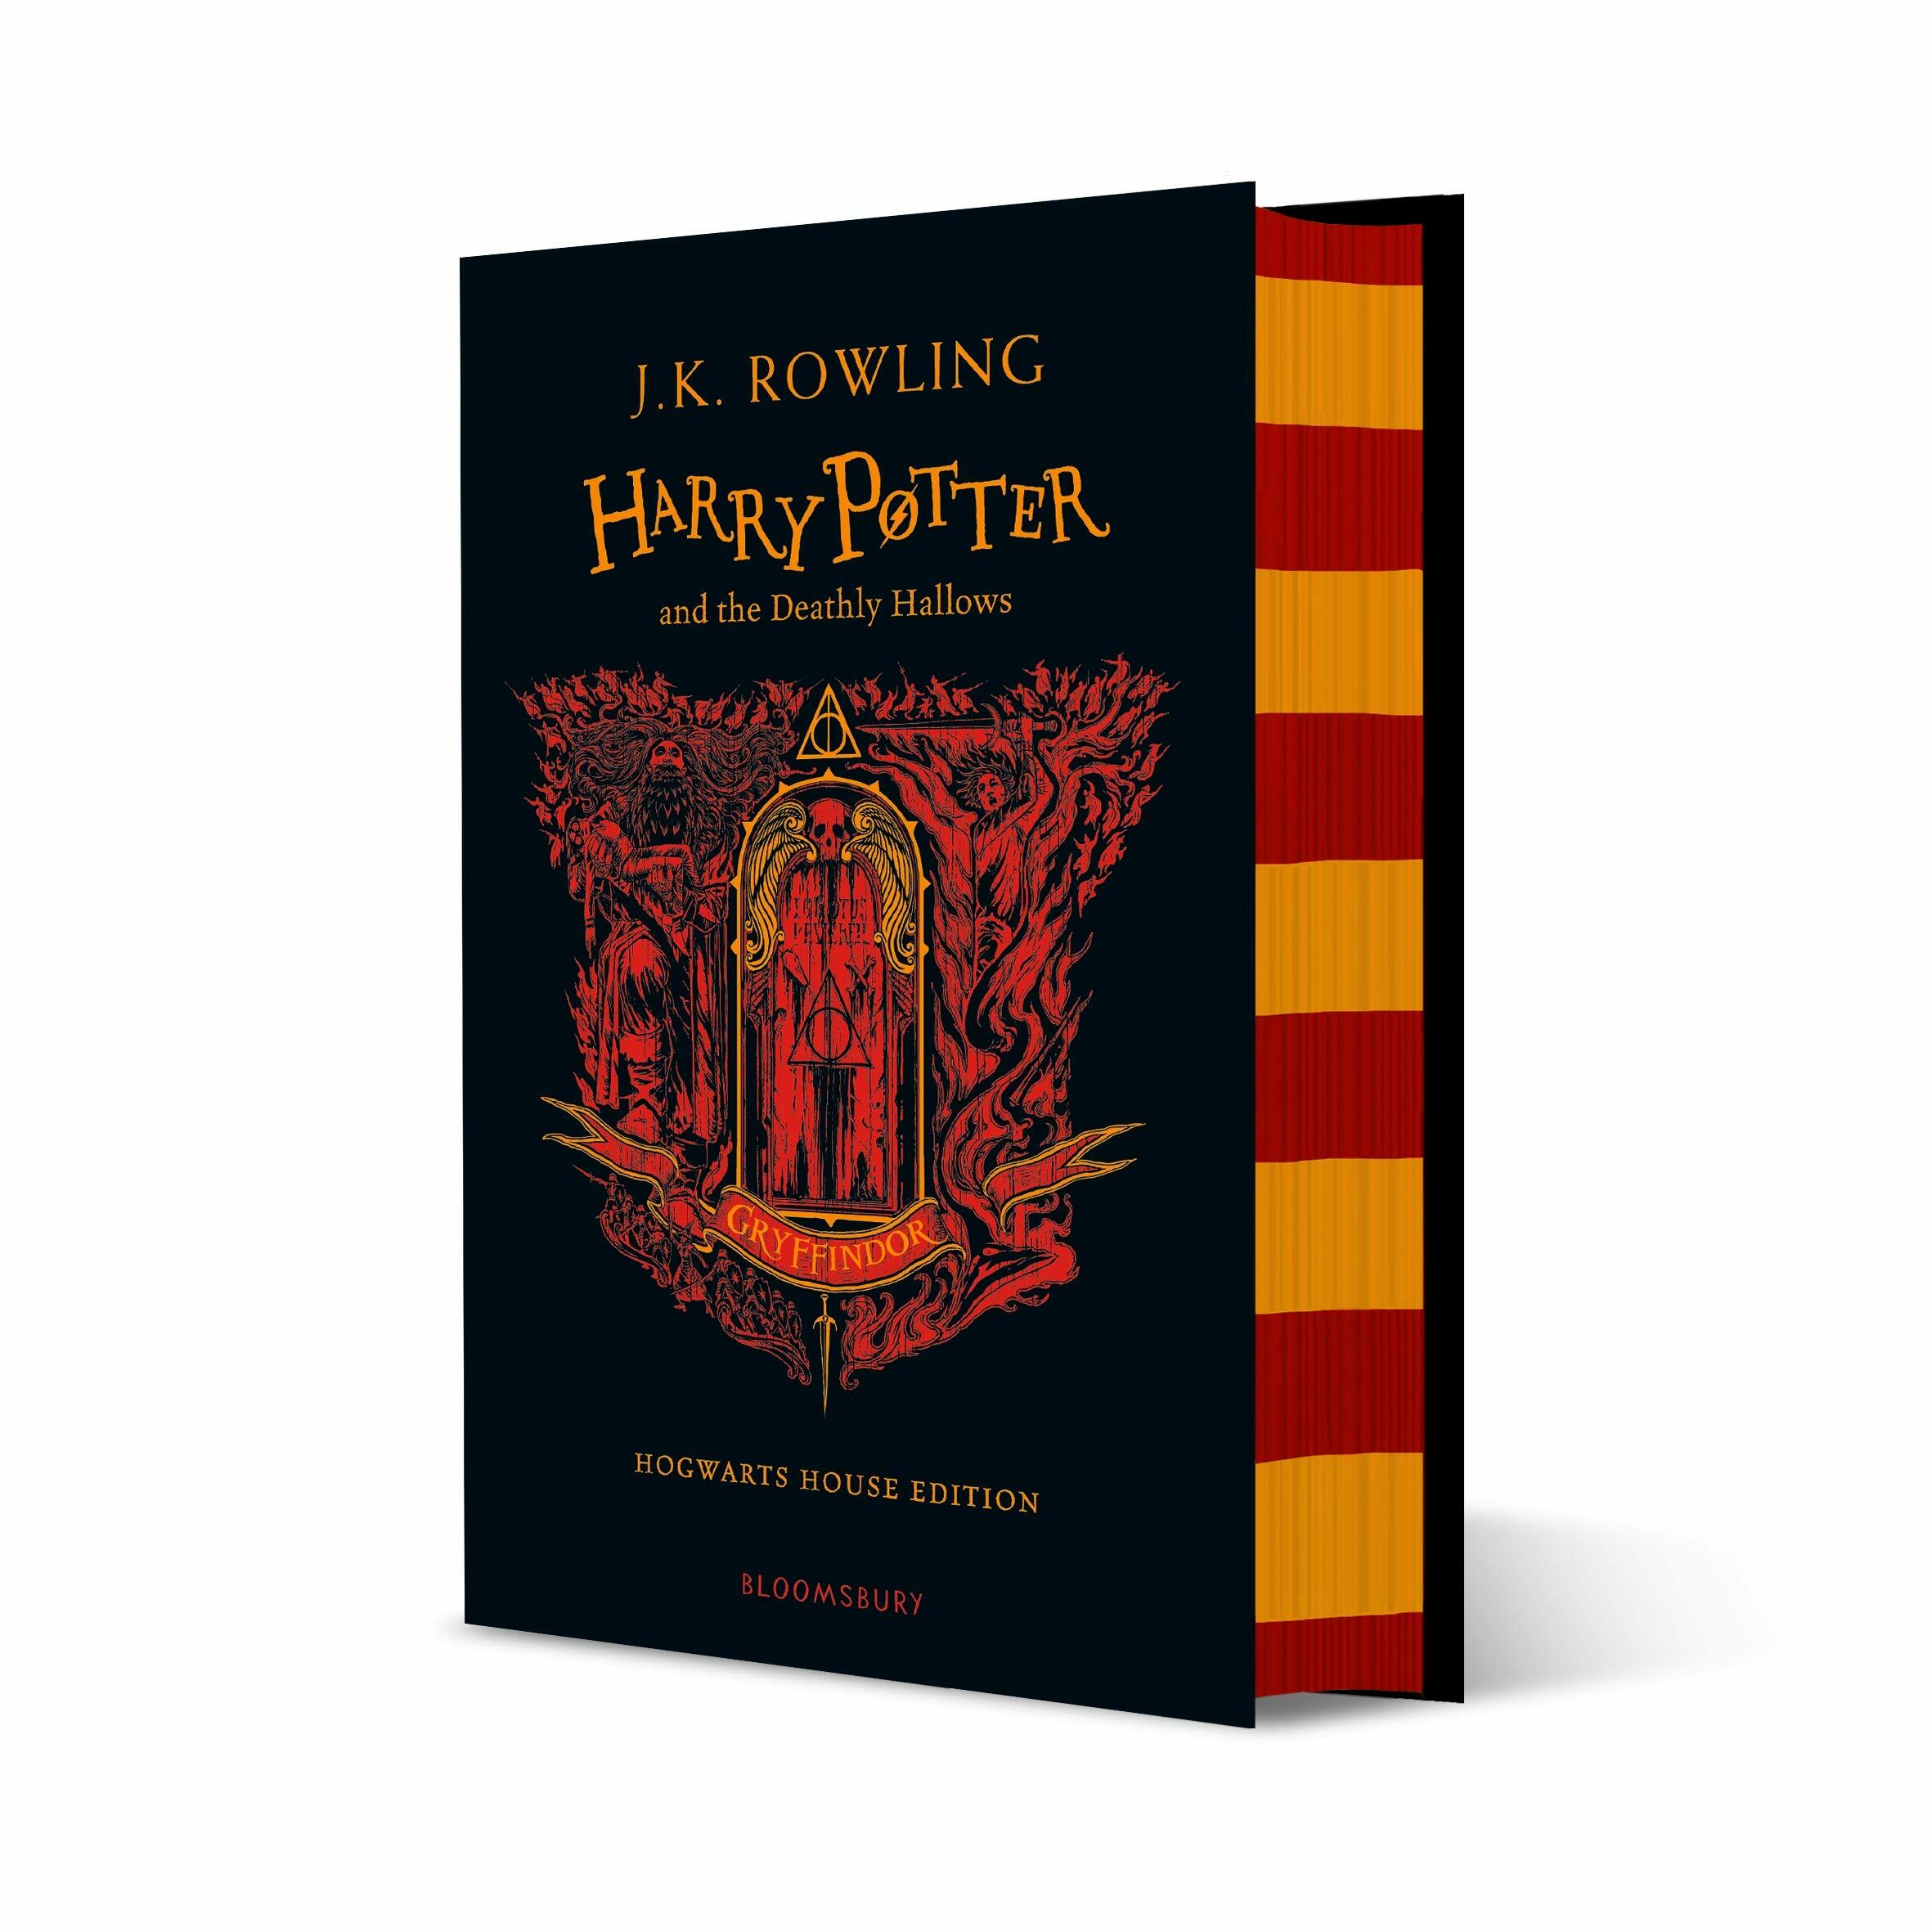 Harry Potter and the Deathly Hallows - Gryffindor Edition (Hardcover)